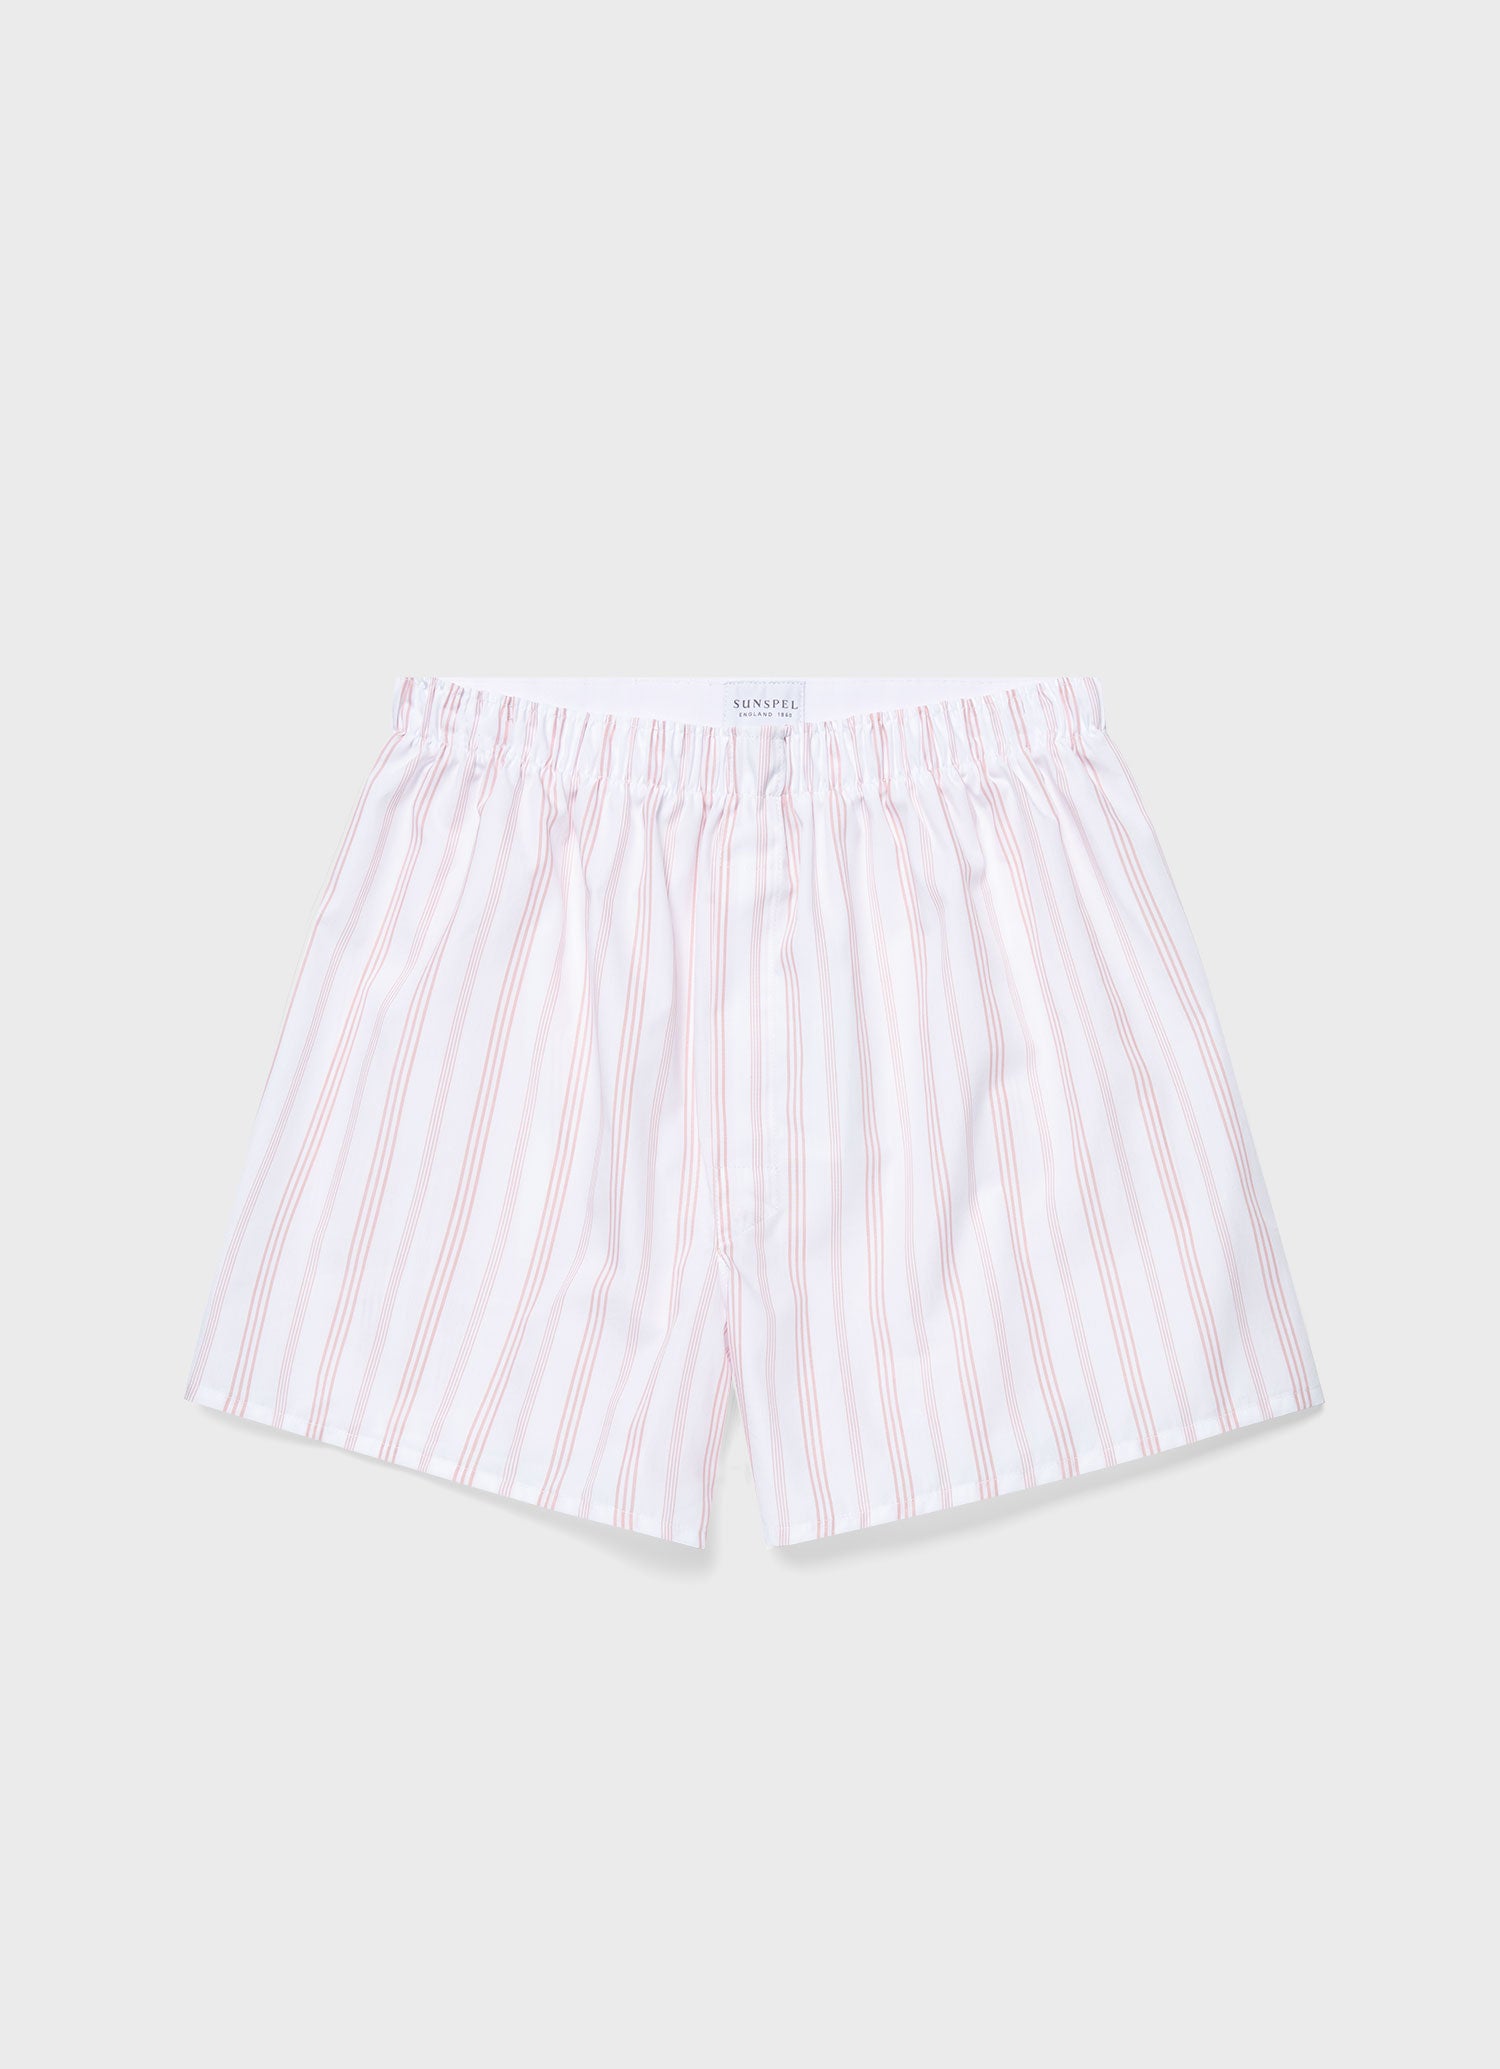 Men's Classic Boxer Shorts in Pale Pink Stripe